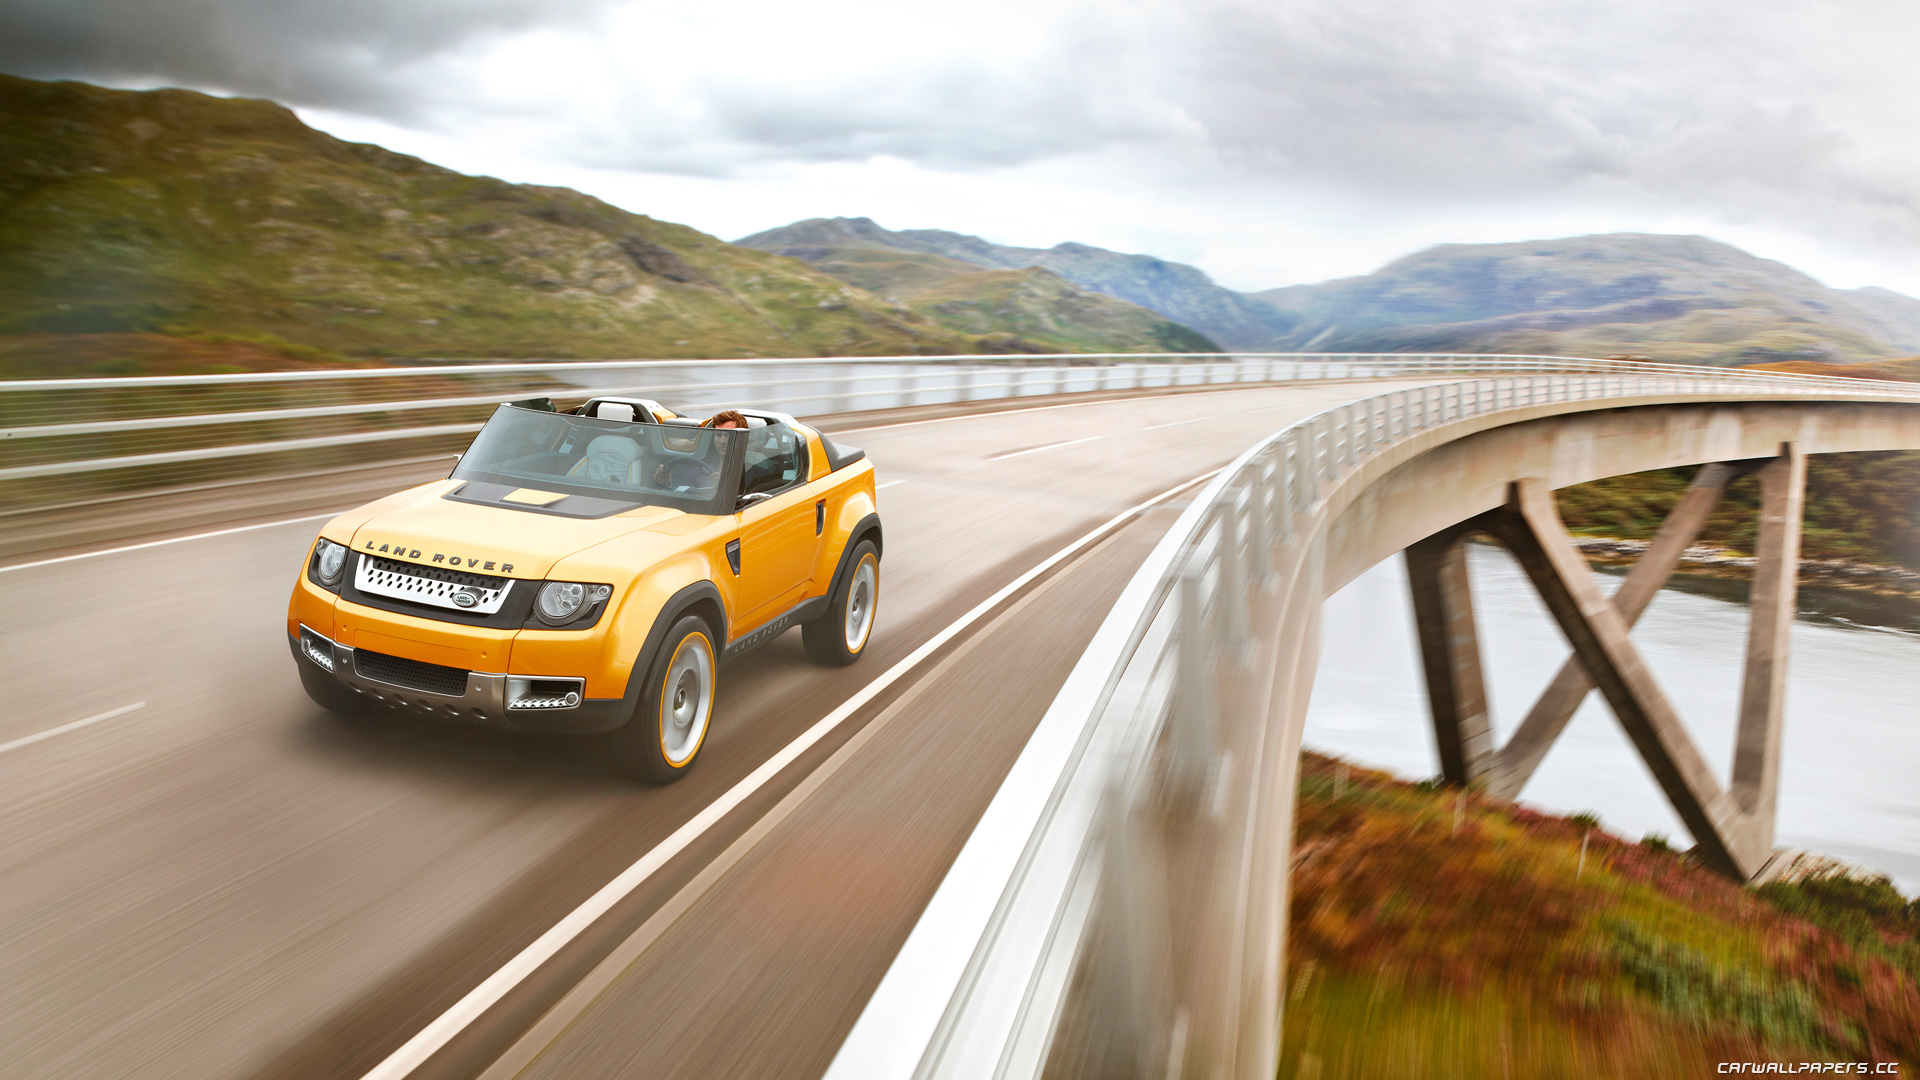 Vehicles 2011 Land Rover Dc100 Sport Concept HD Wallpaper | Background Image